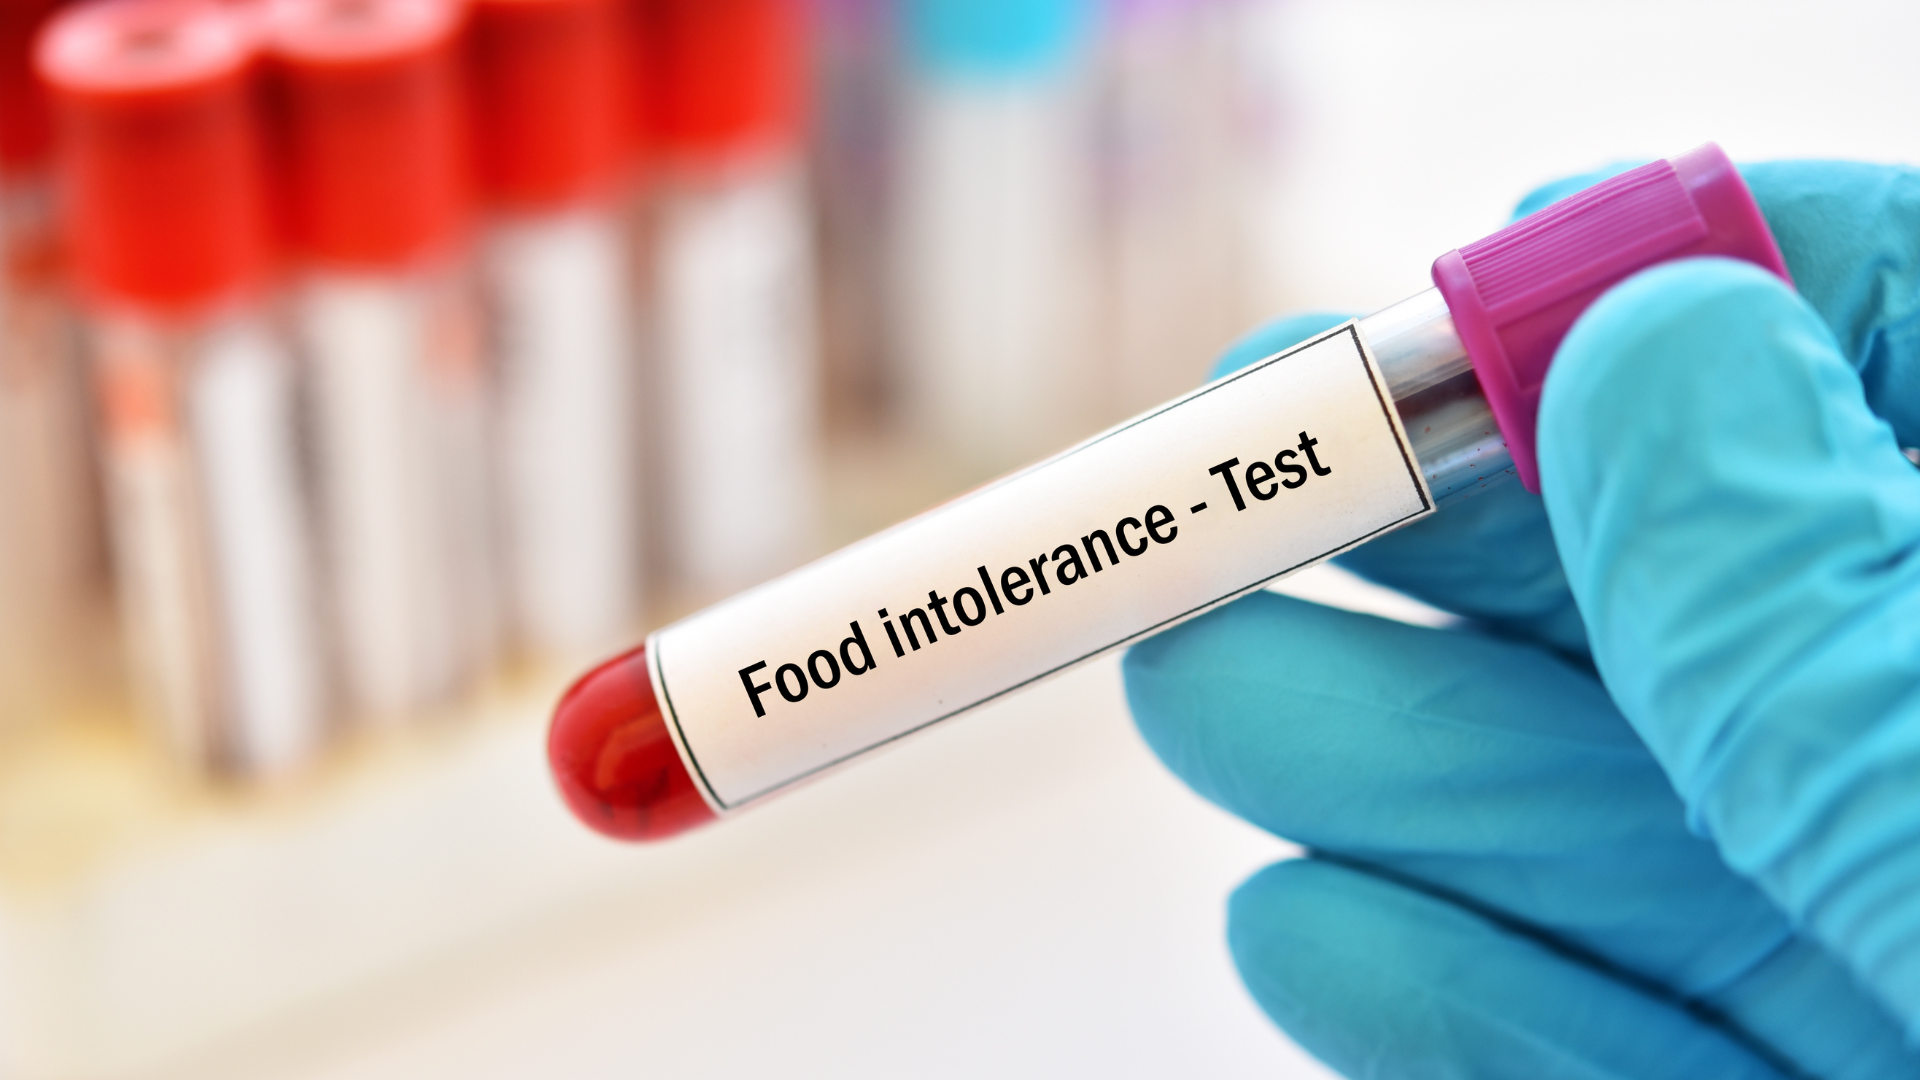 gloved hands holding a test tube with "food intolerance - test" on it